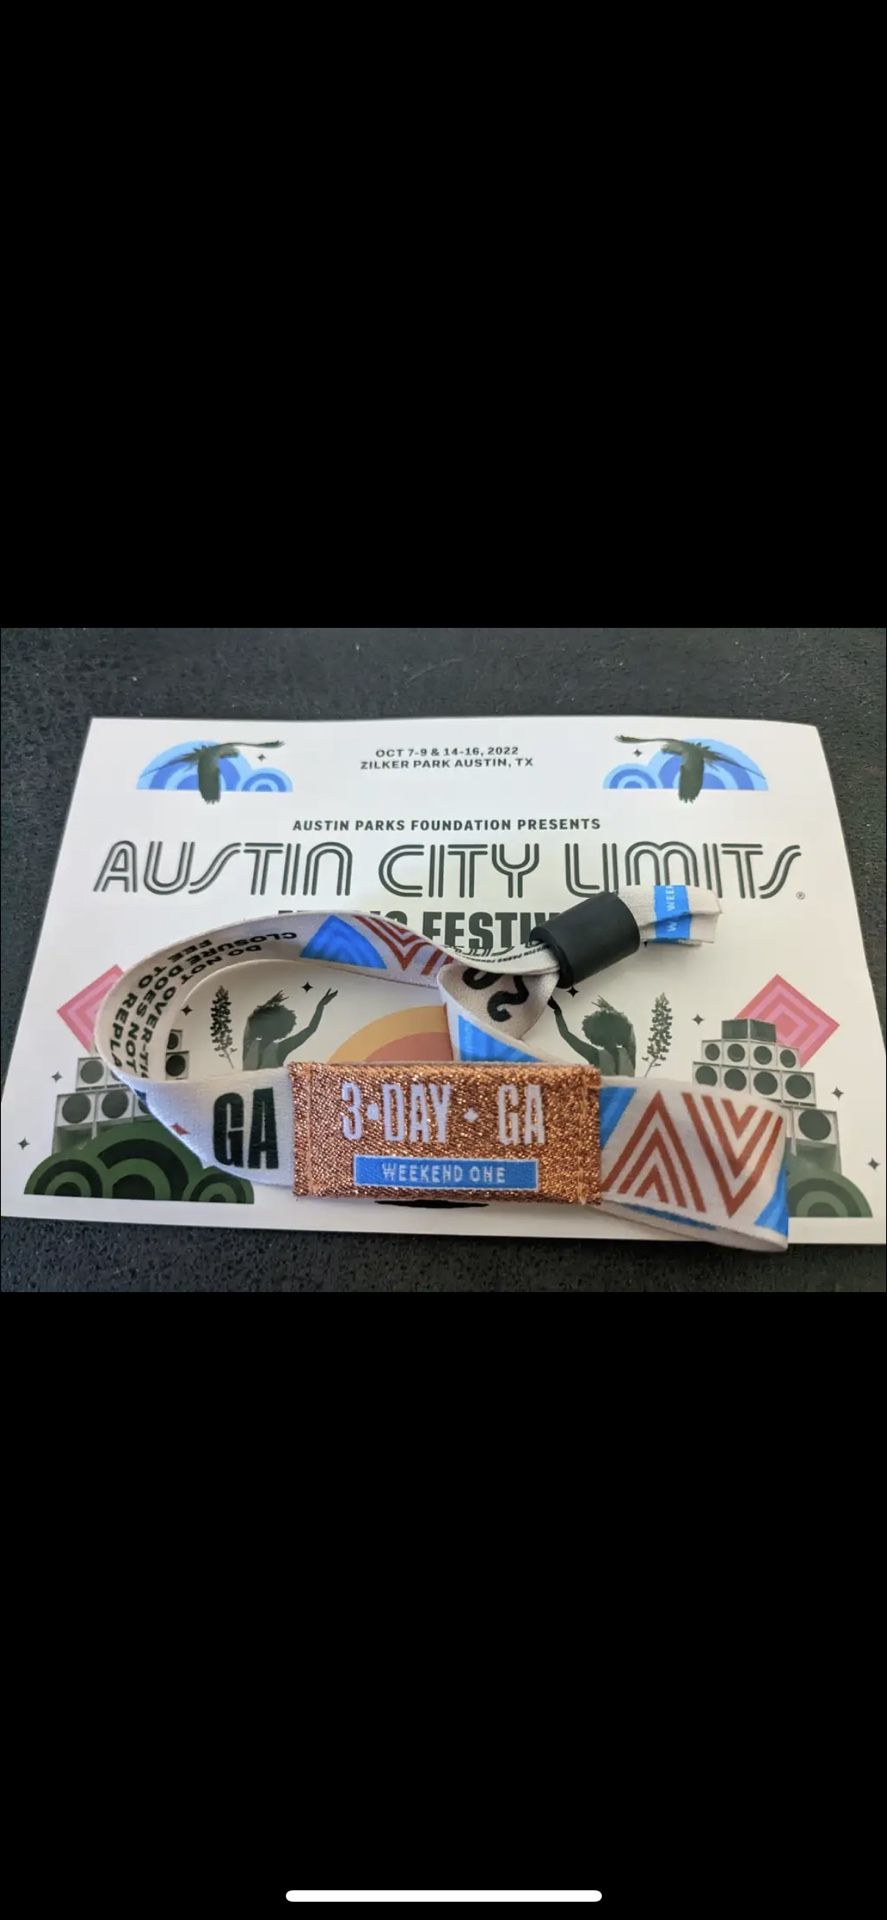 ACL Weekend 1 Wristbands - 3 Day Wristbands (3 Wristbands For Sale) 